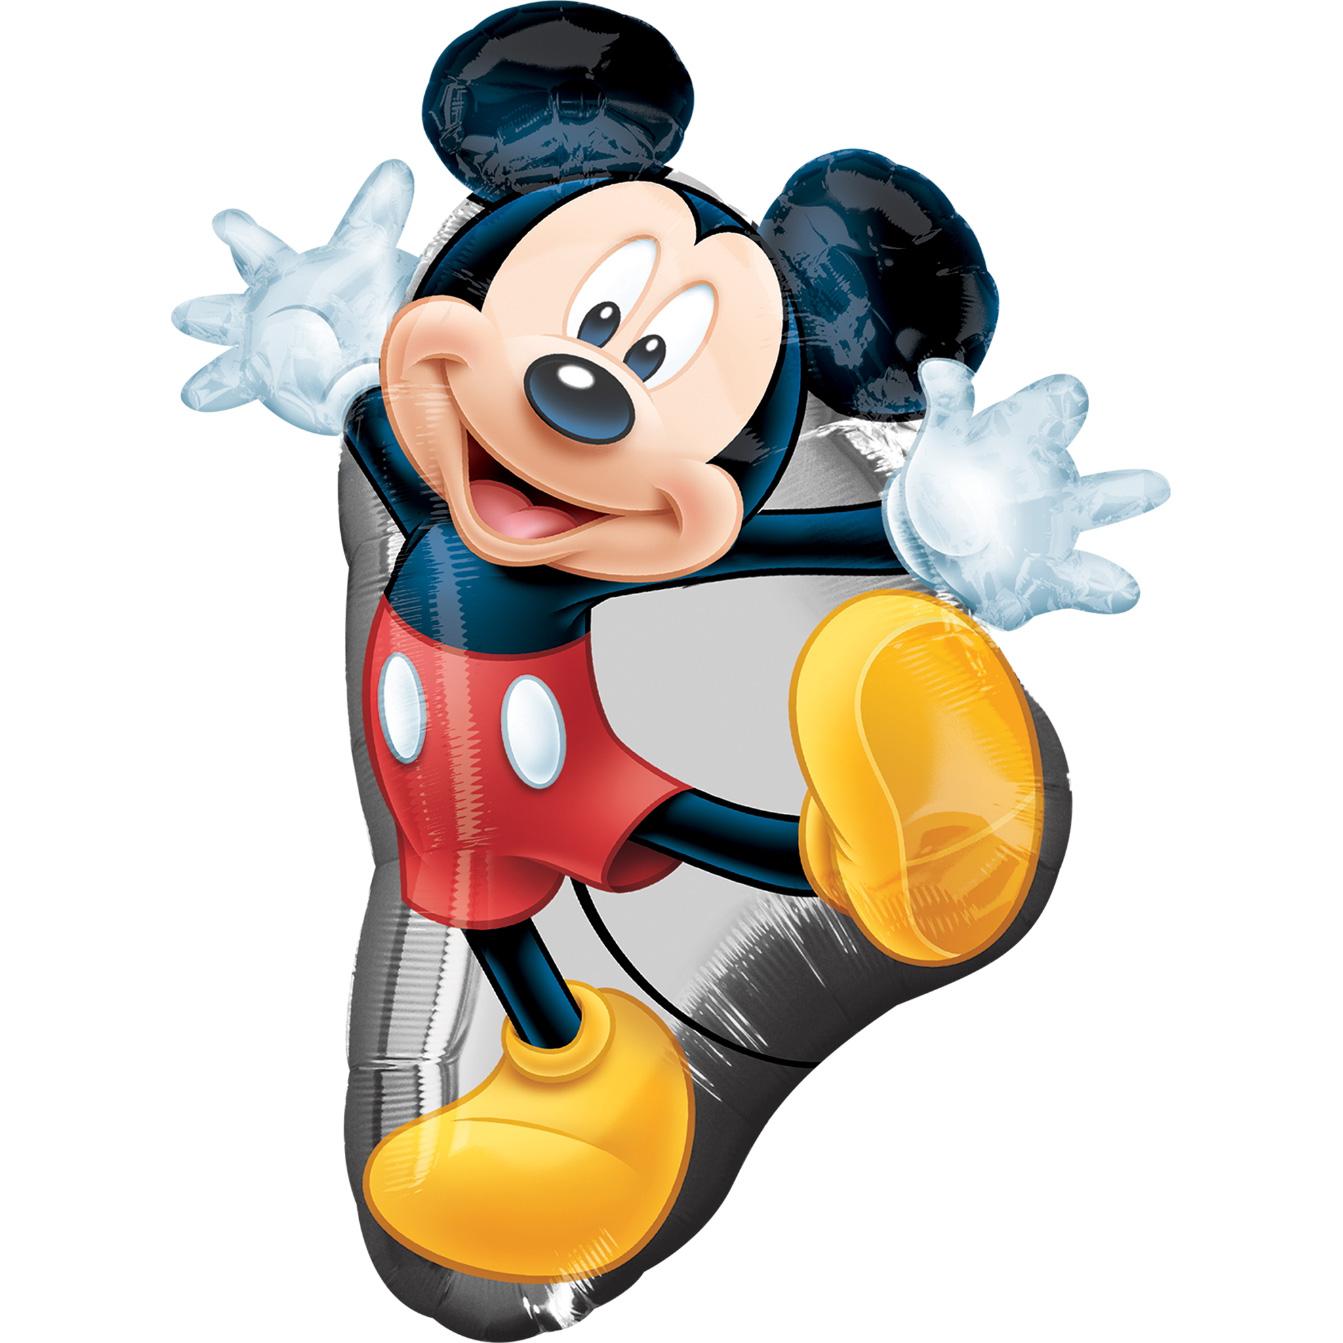 Mickey Full Body Supershape Balloon 31in Balloons & Streamers - Party Centre - Party Centre